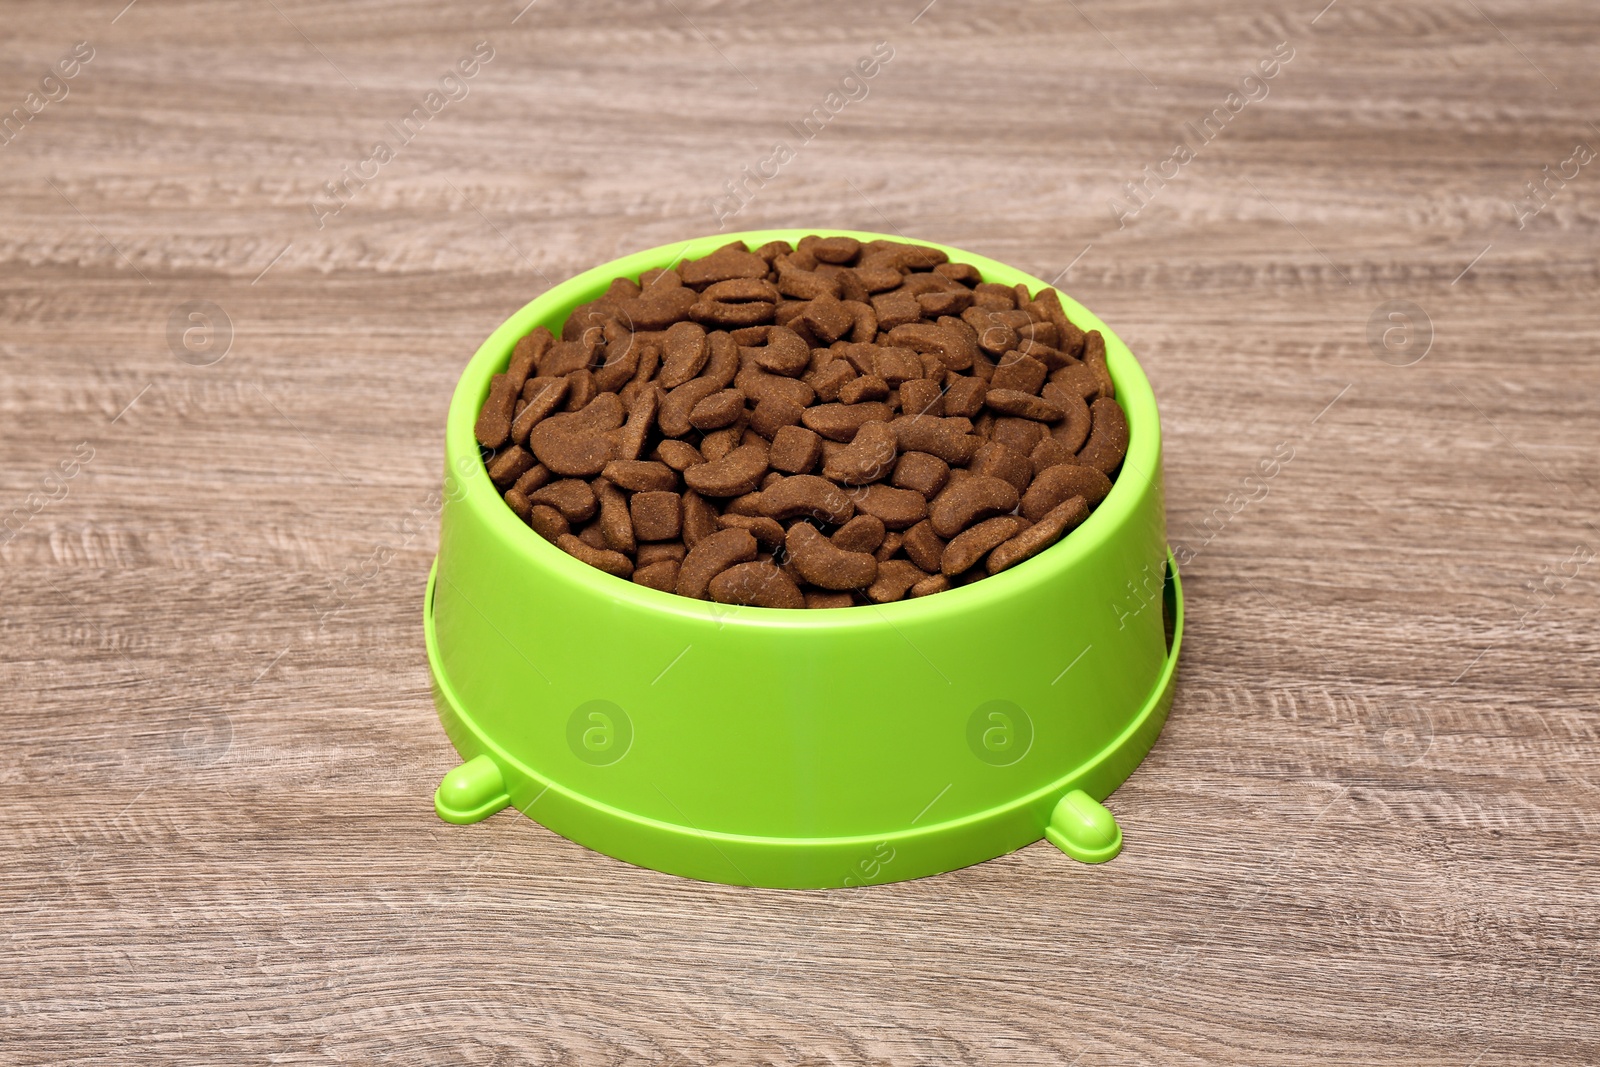 Photo of Dry food in green pet bowl on wooden surface